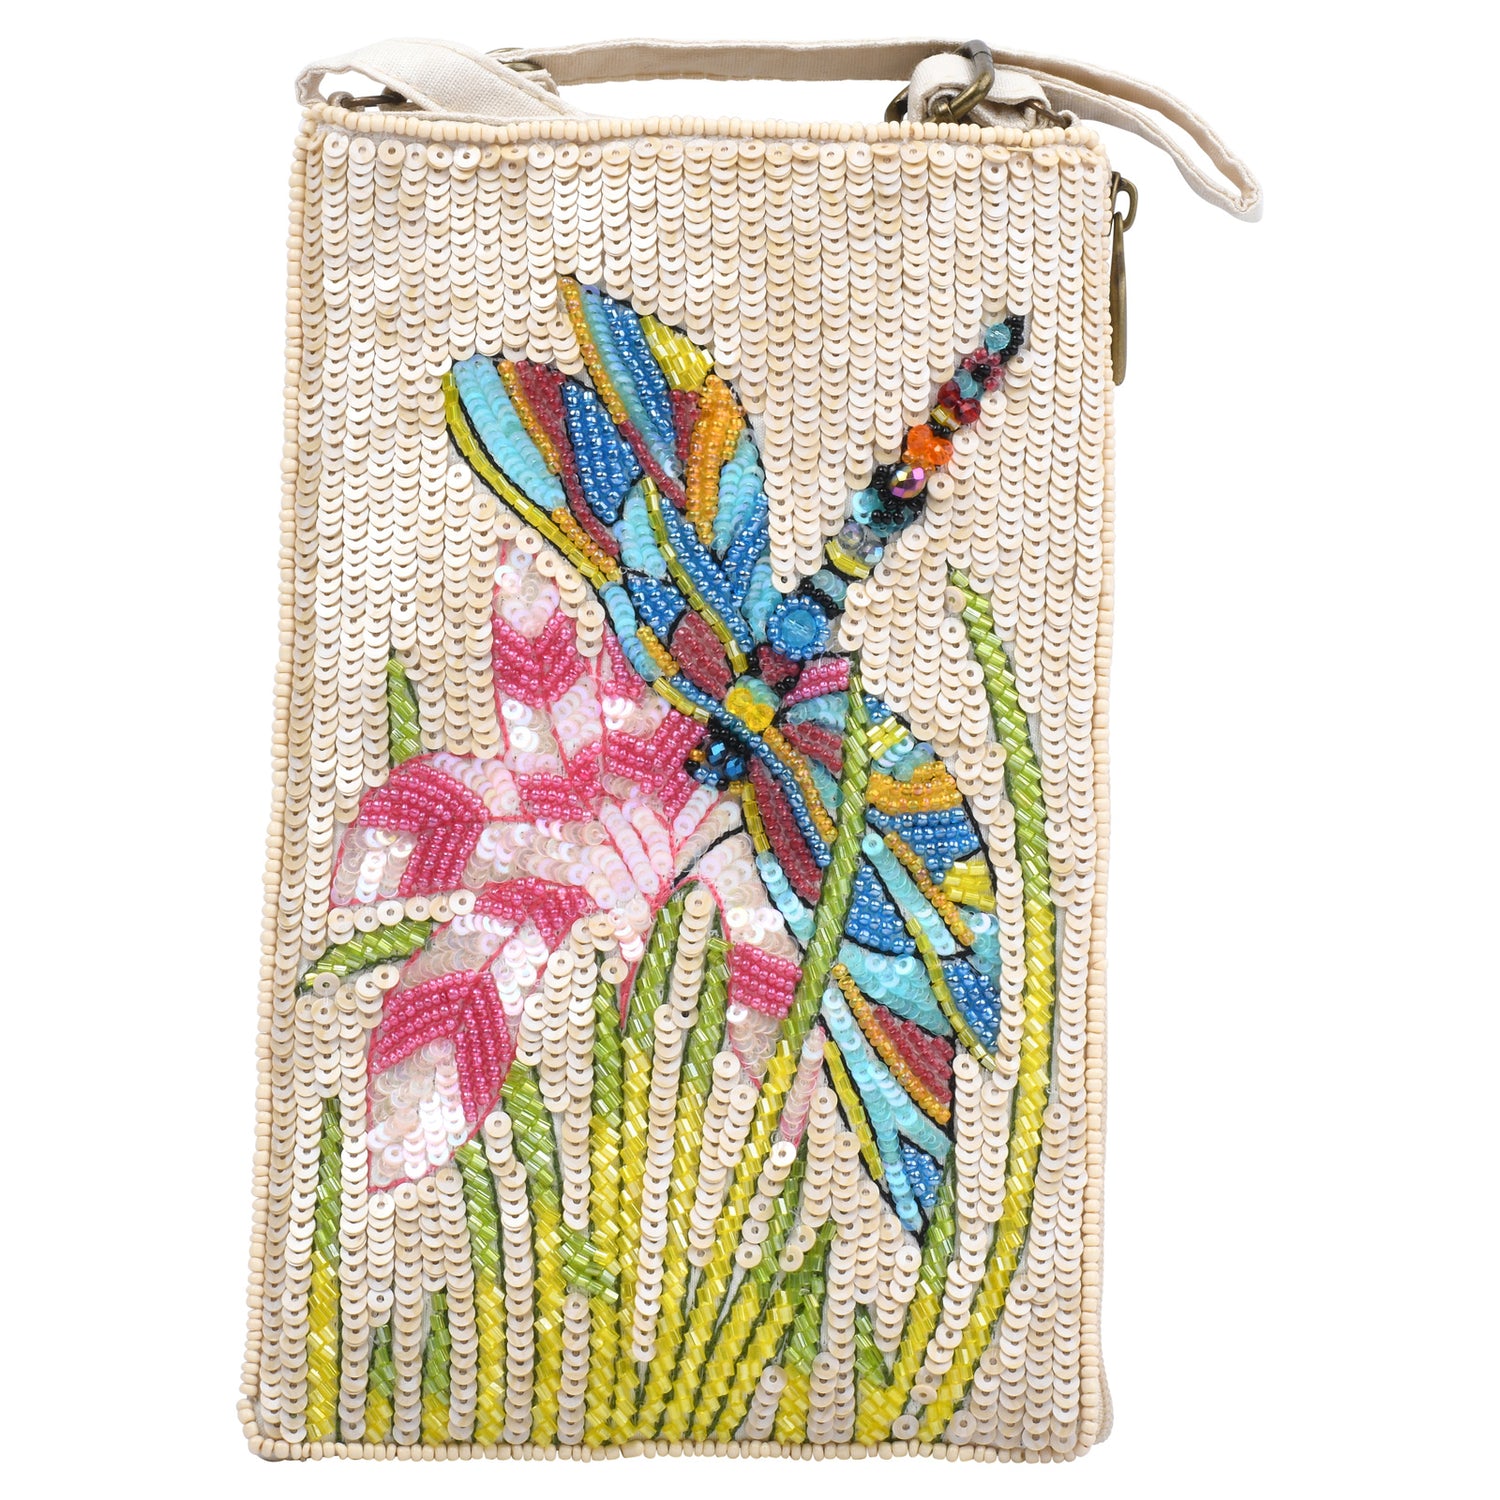  Mellow World Flower Shop Embroidered Hand Beaded